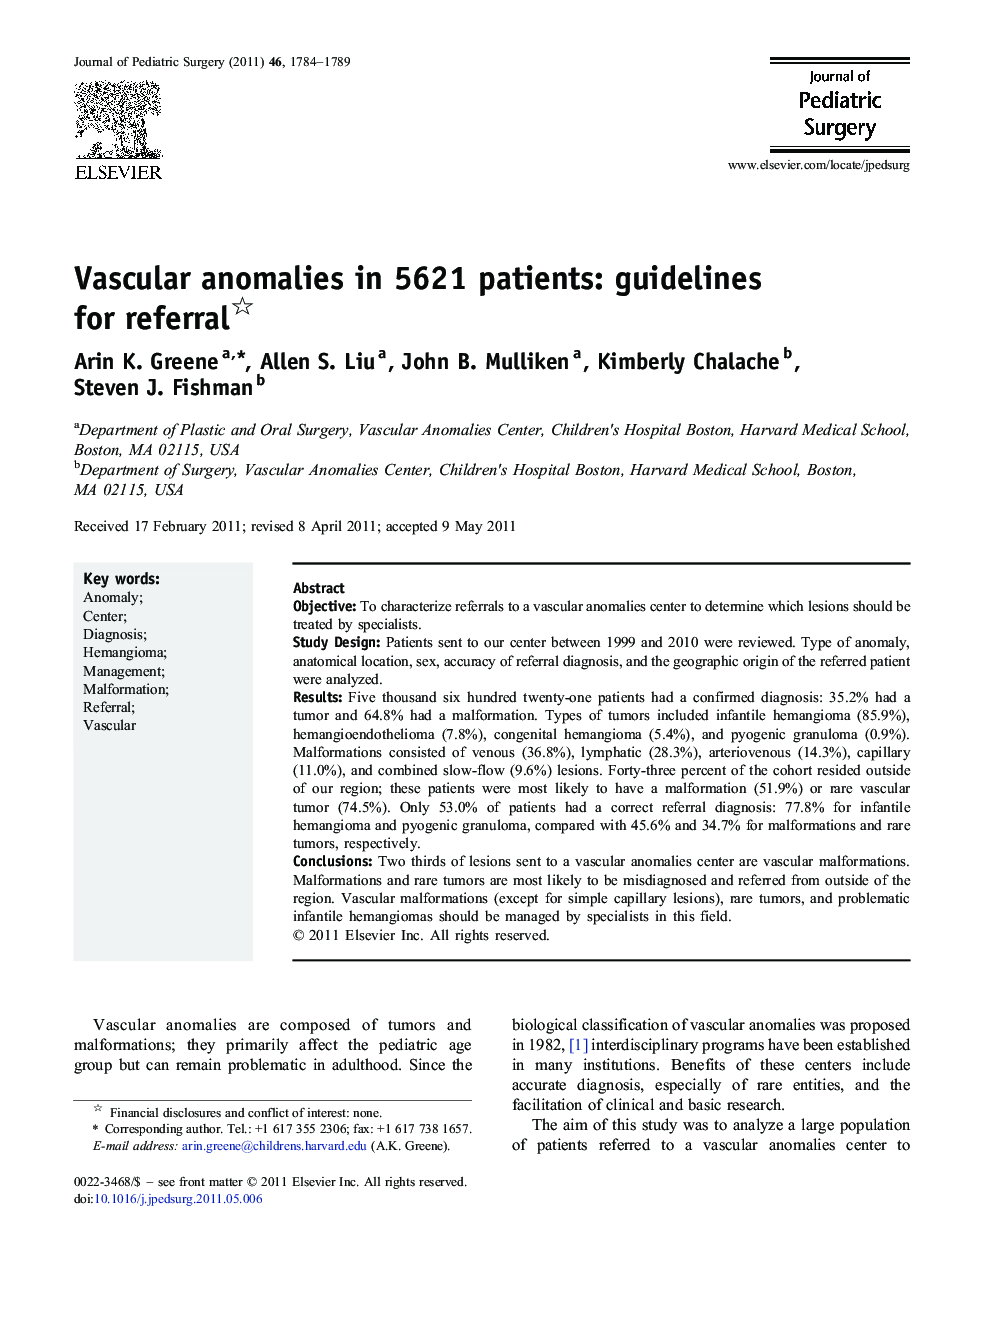 Vascular anomalies in 5621 patients: guidelines for referral 